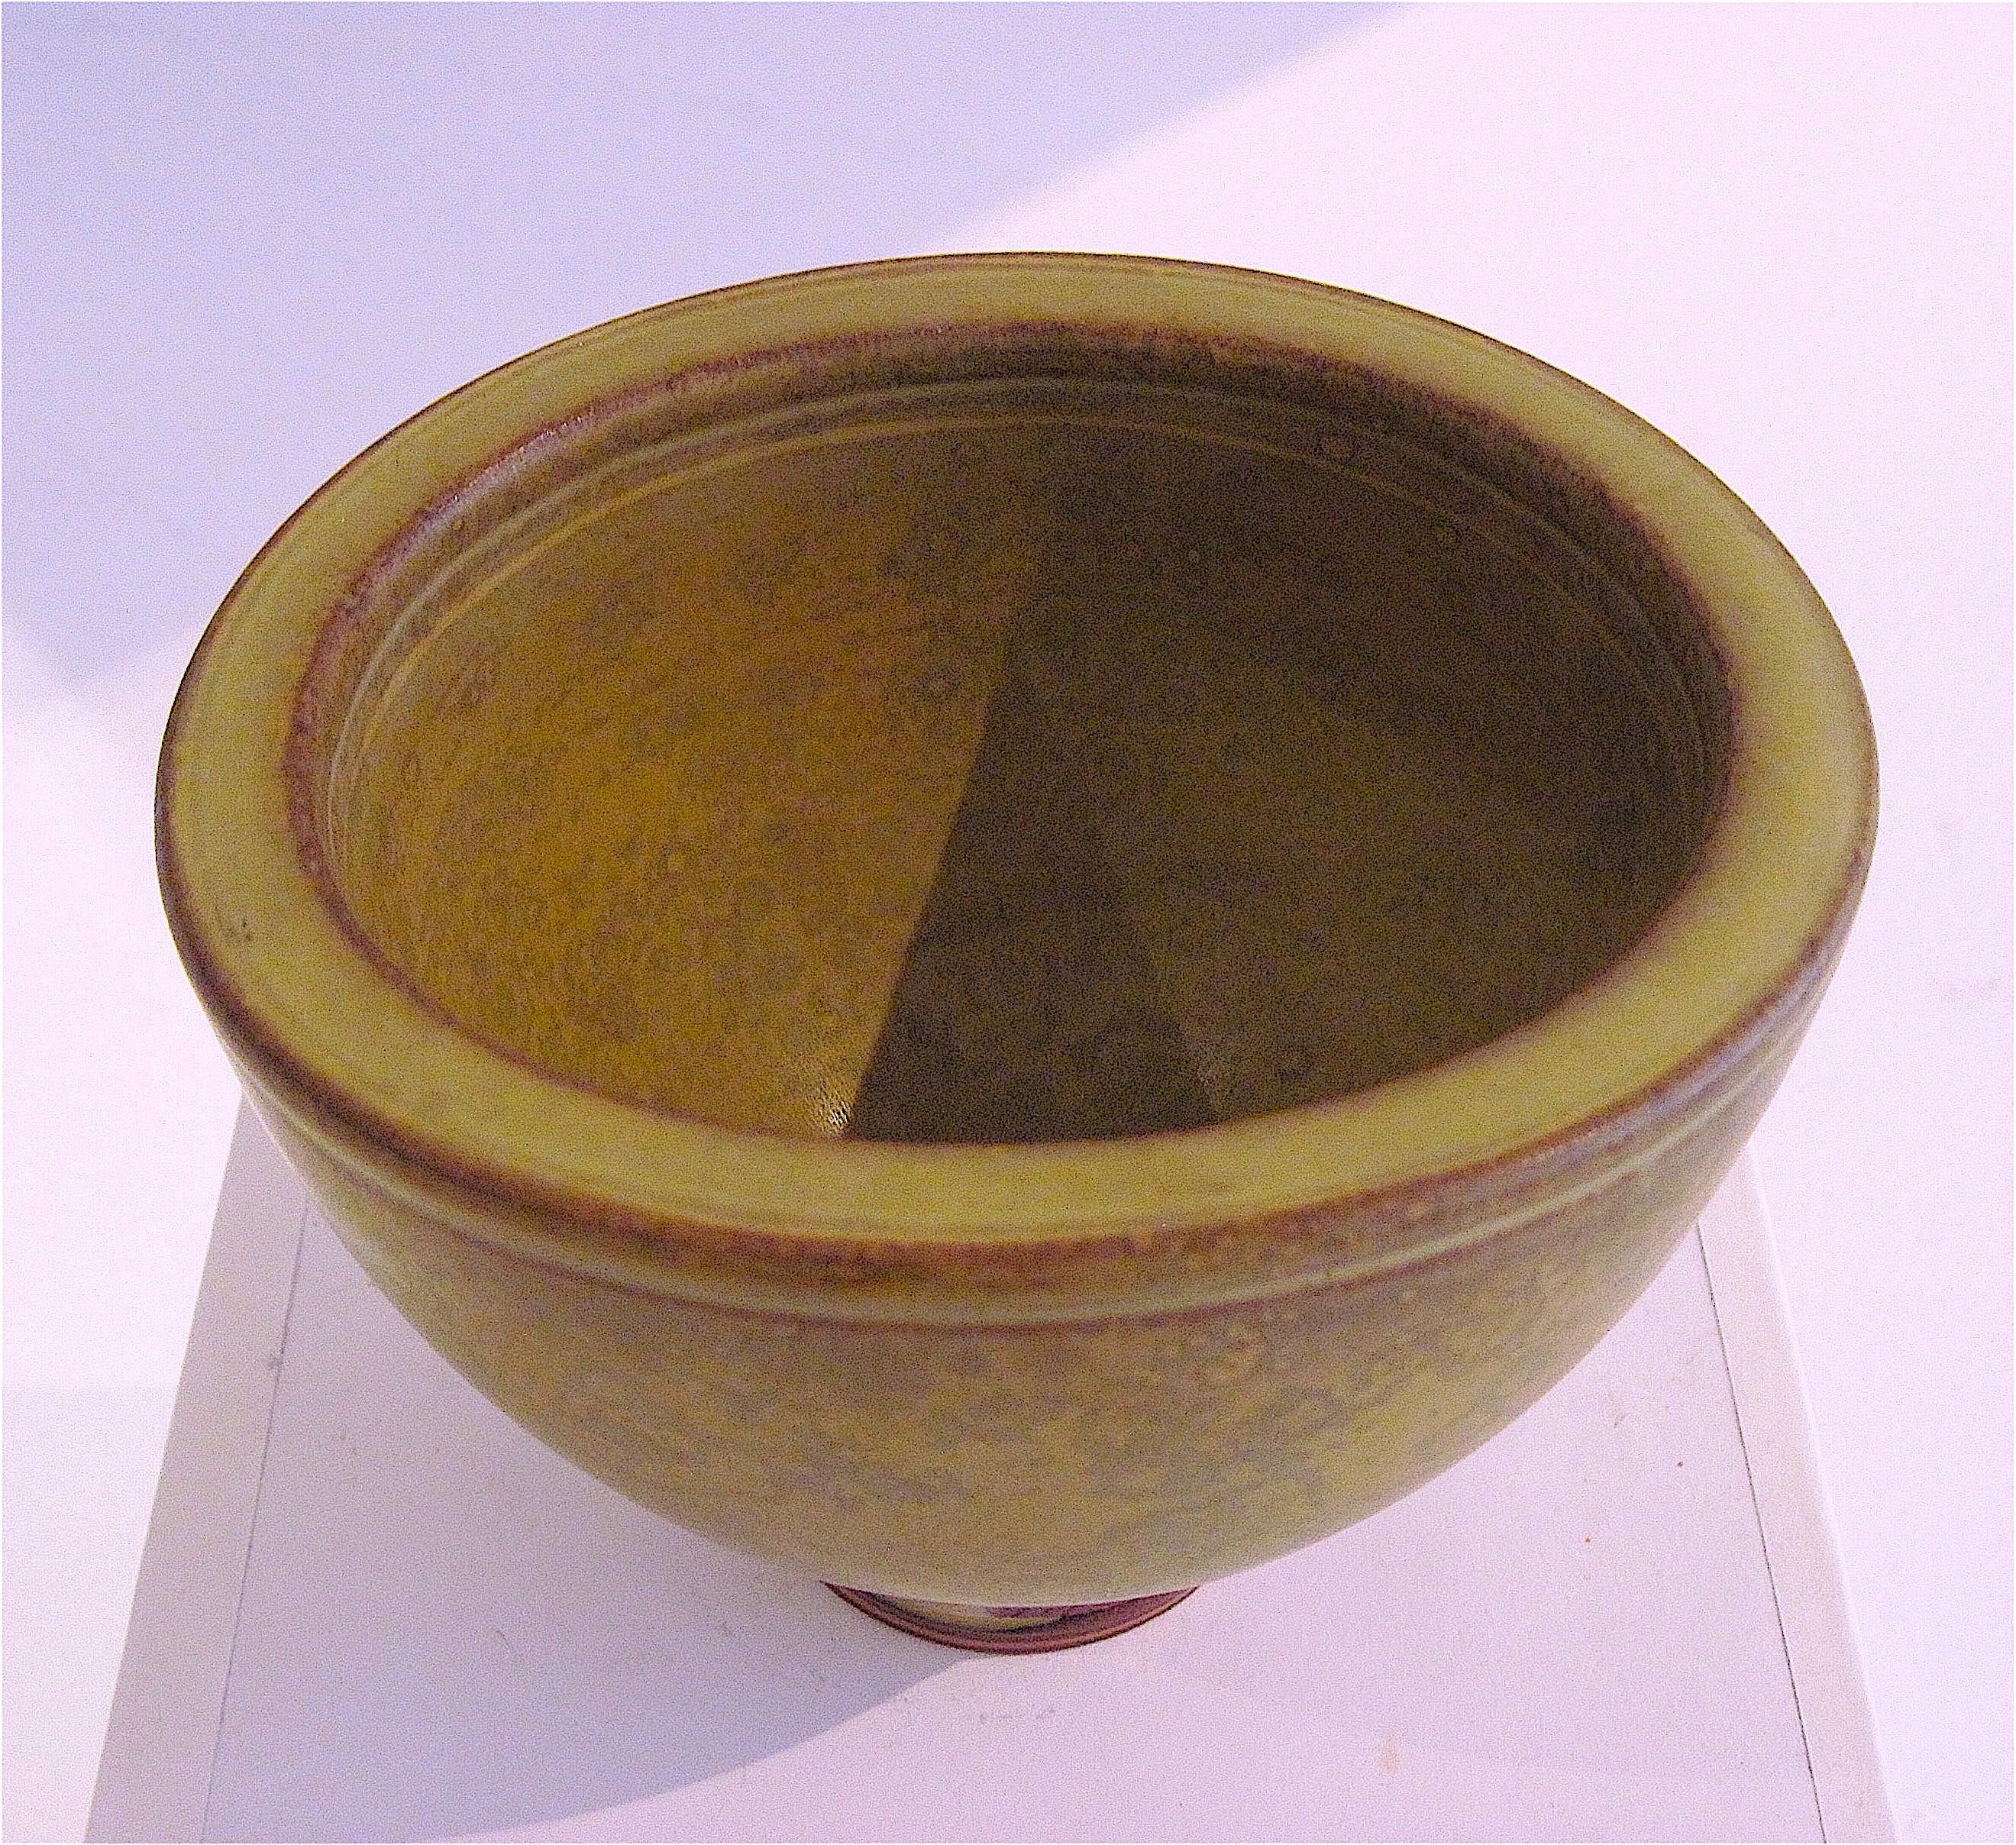 Excellent hand thrown Kage Farsta stoneware bowl with interesting and nicely drippy matte finish yellow/ochre glaze. Hand signed and stamped, as shown. The world renown Wilhelm Kage (1889 - 1960) was a Swedish artist, painter and ceramist. He was